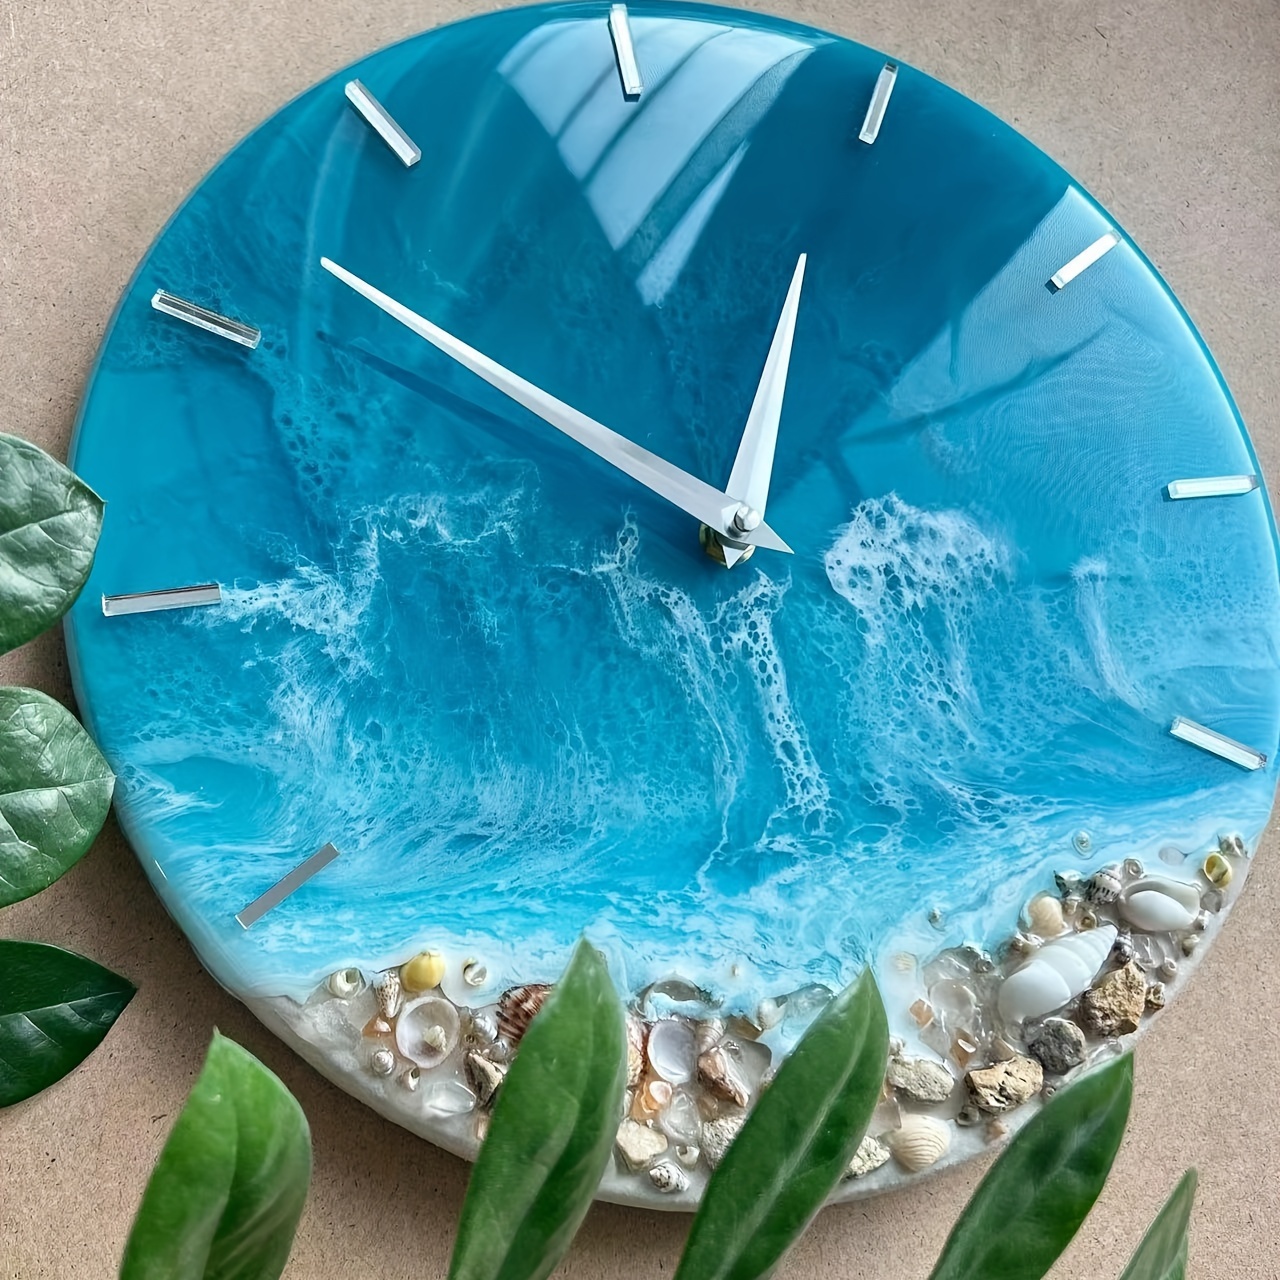 Clock Epoxy Mold for Resin Casting Clock Wall Decor Mould Number Clock  Silicone Mold DIY Wall Hangings-Decor Mould - AliExpress